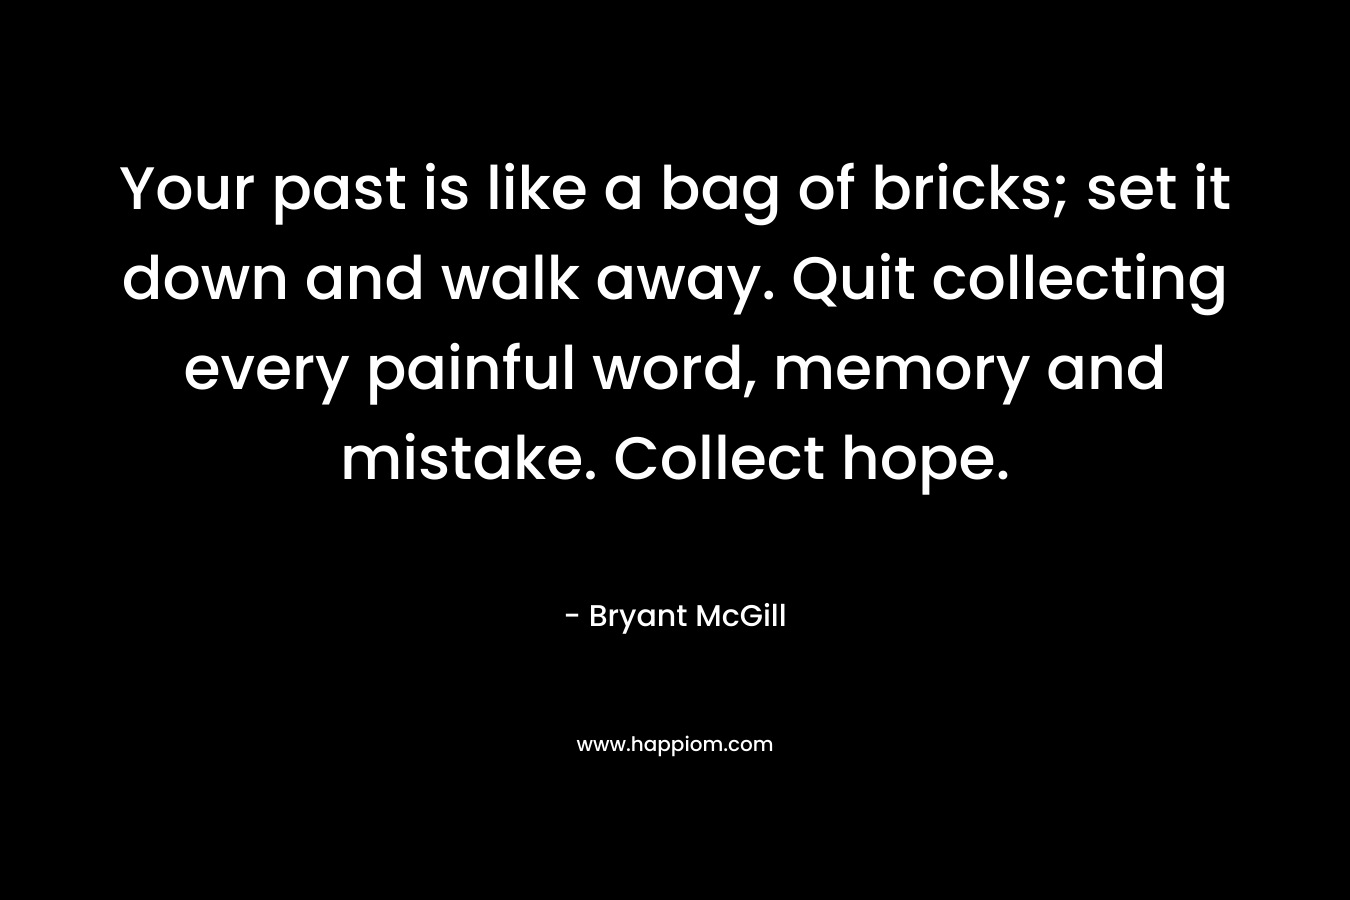 Your past is like a bag of bricks; set it down and walk away. Quit collecting every painful word, memory and mistake. Collect hope. – Bryant McGill